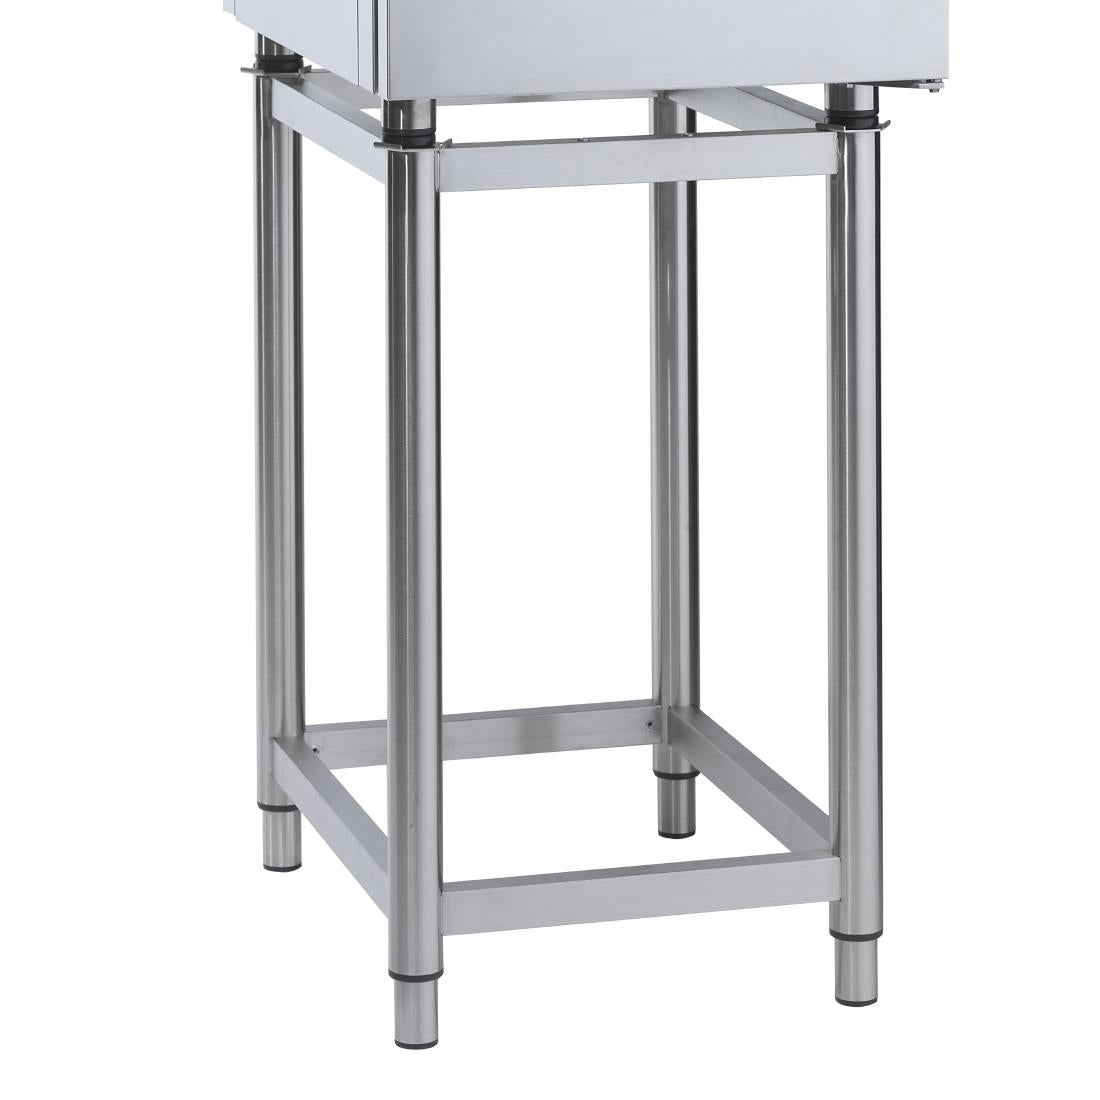 CH309 Giorik Kore Stand with Trayslides TK1 JD Catering Equipment Solutions Ltd